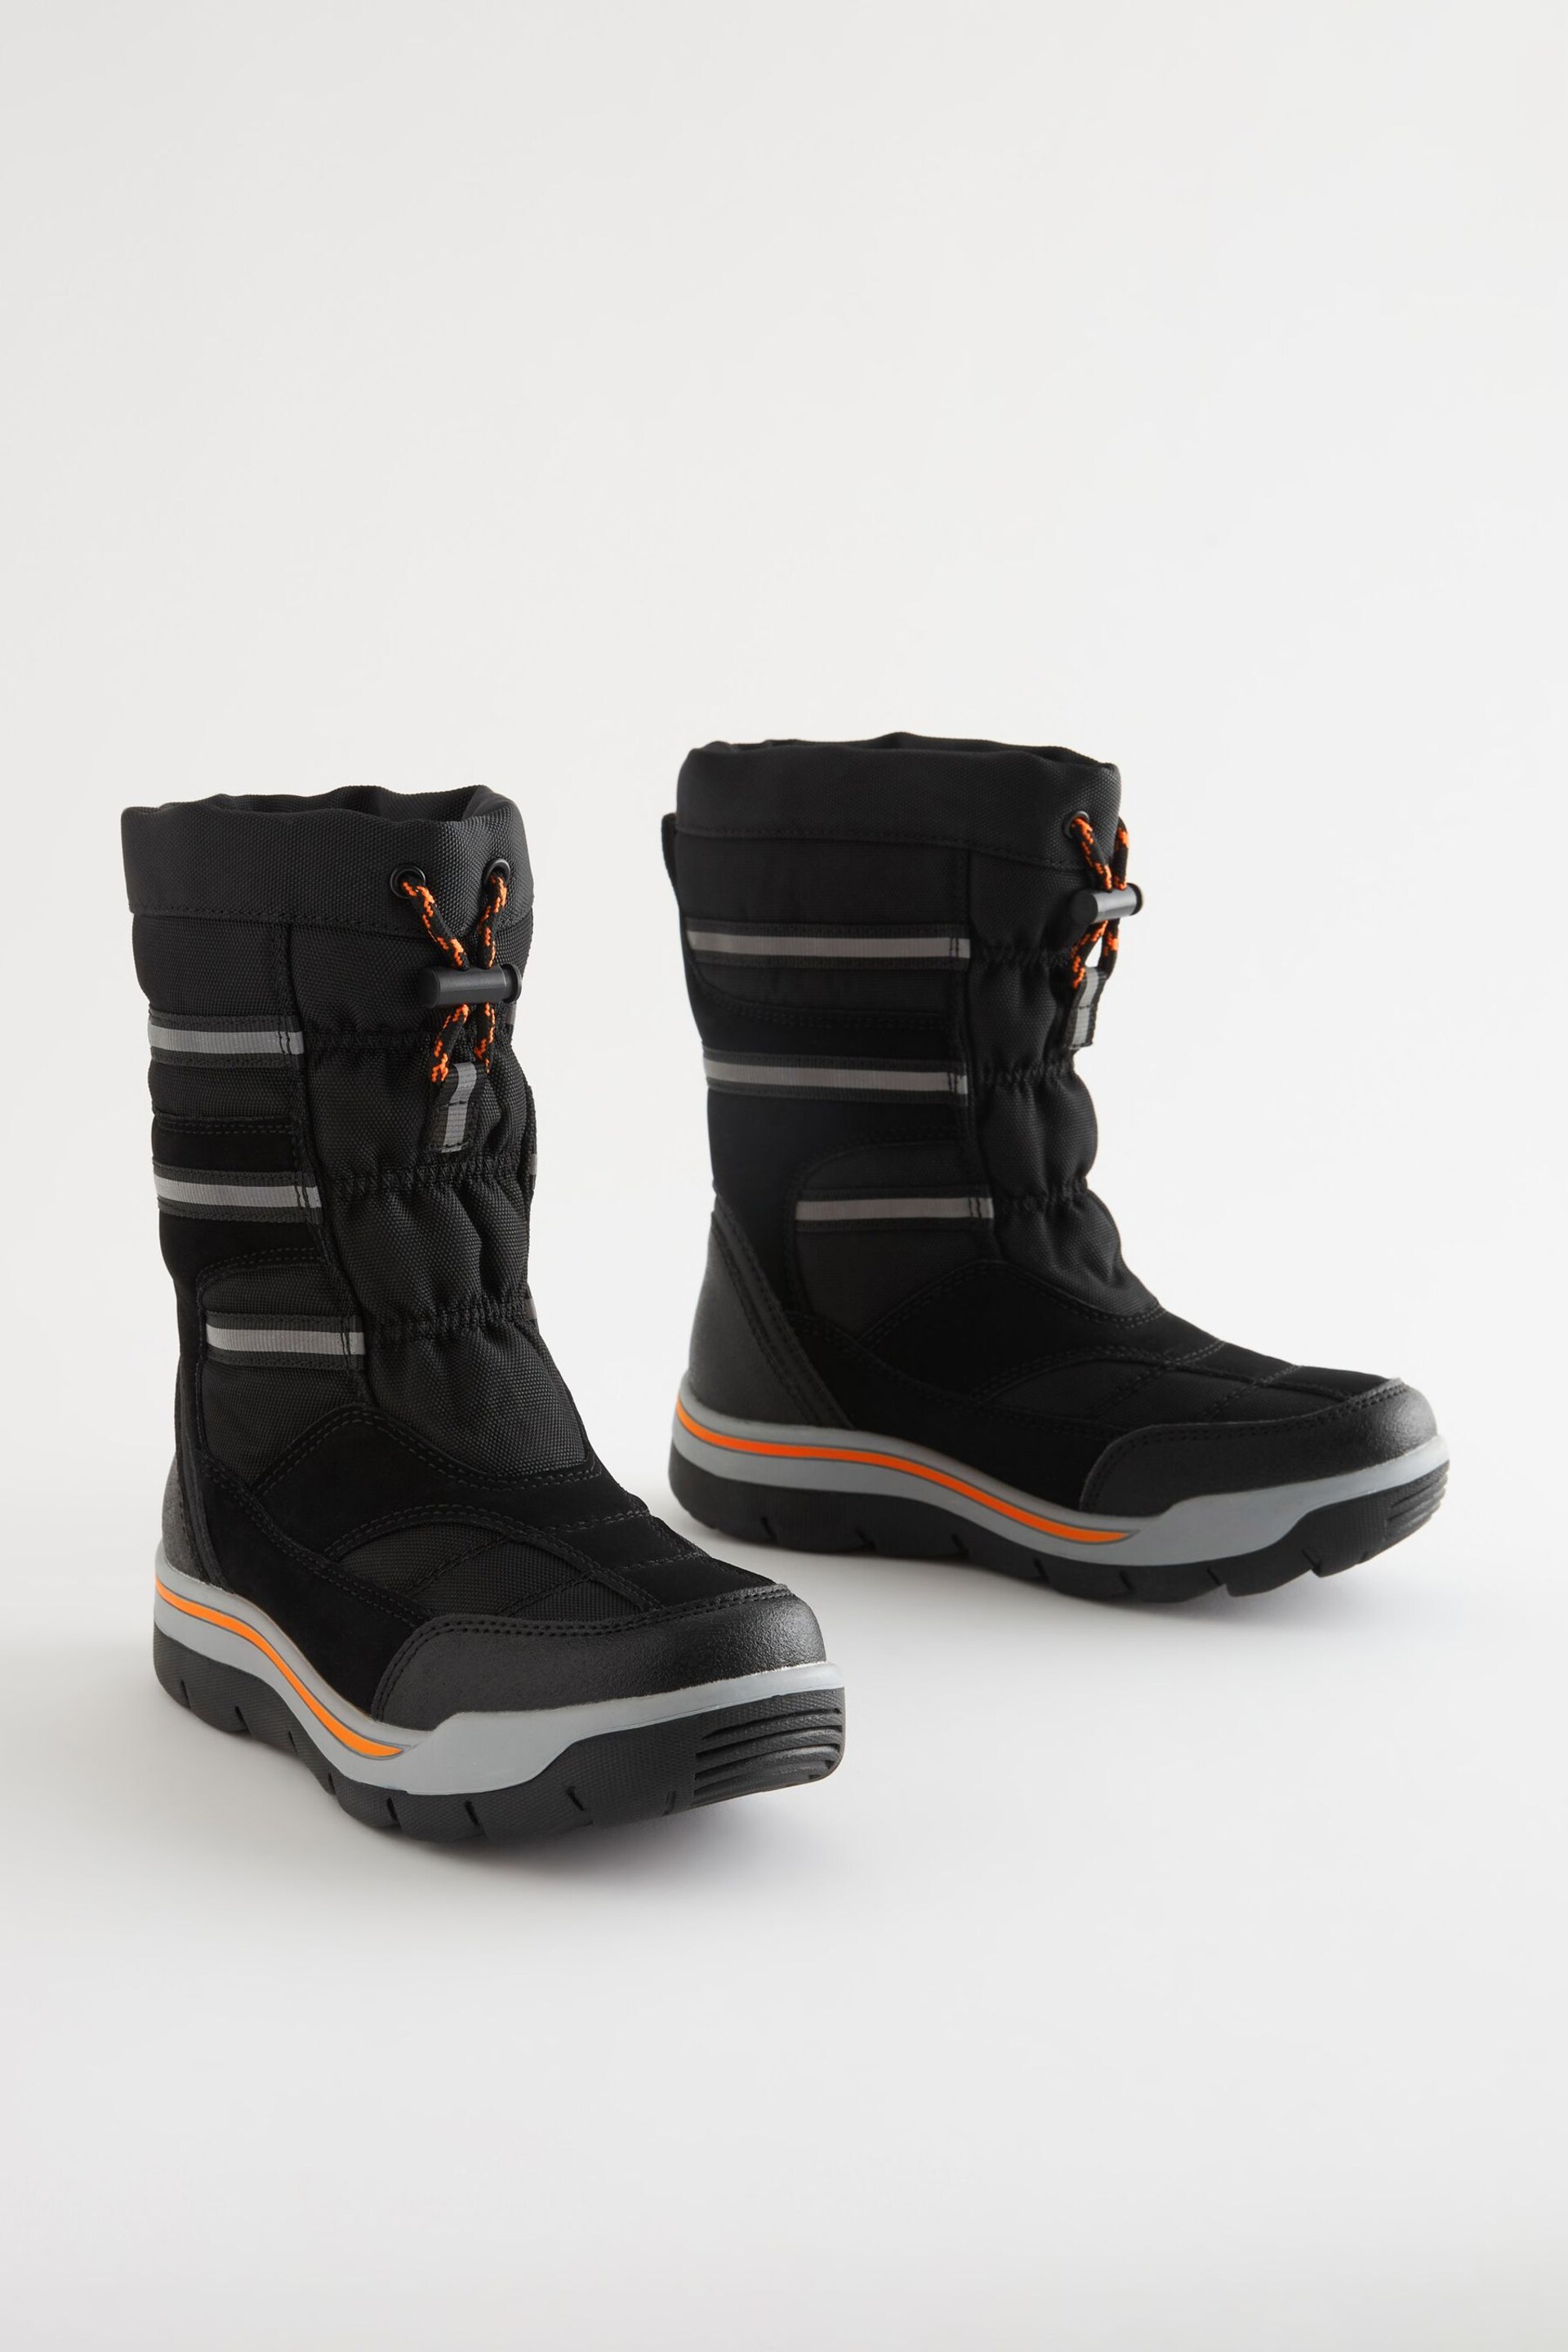 Black Water Resistant Thinsulate™ Warm Lined Snow Boots - Image 1 of 6